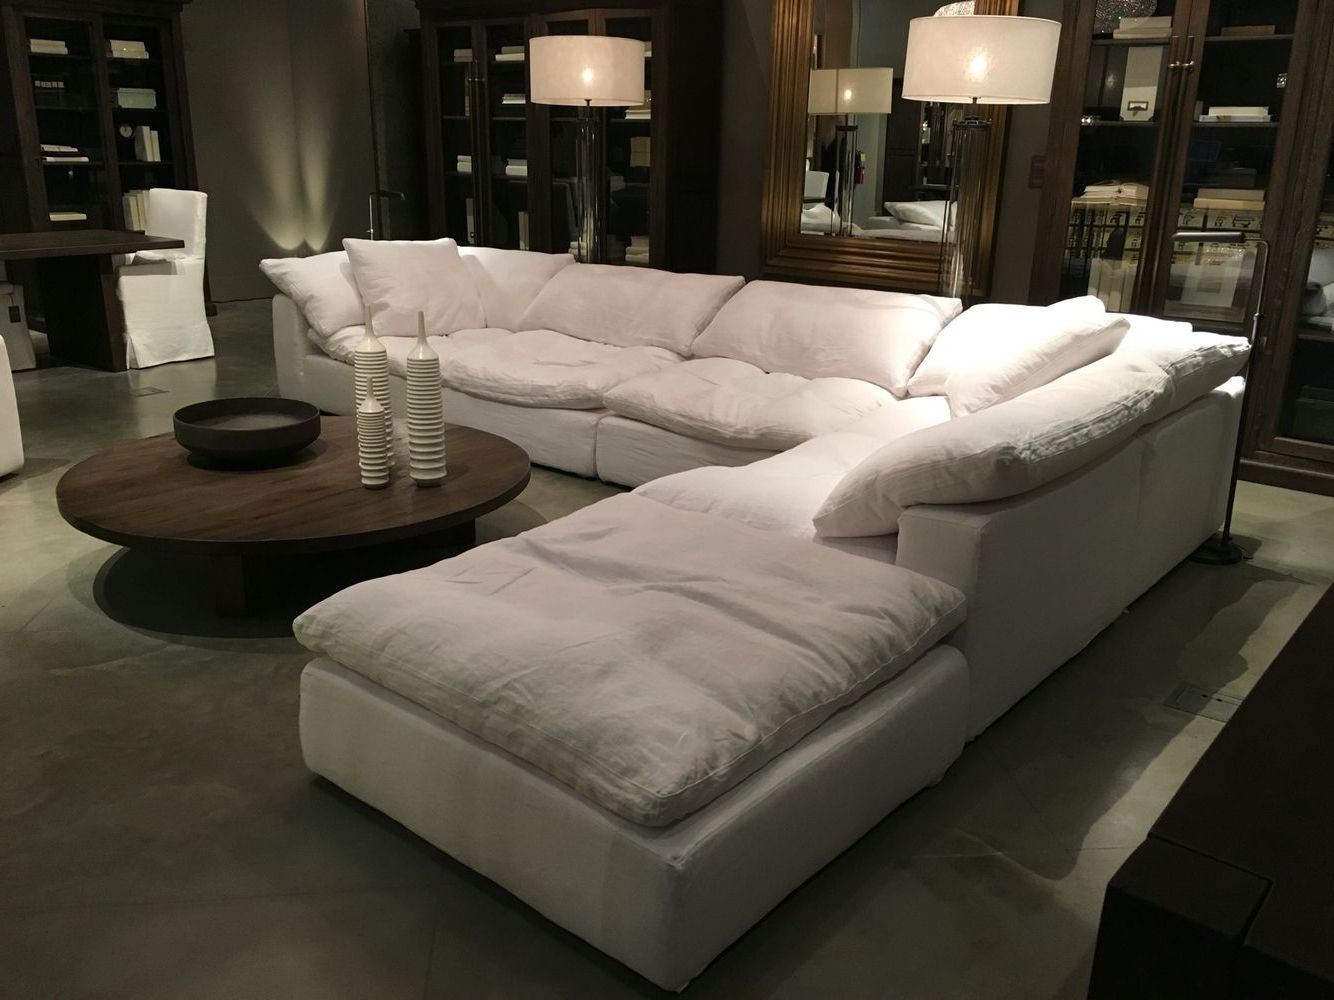 [%restoration Hardware Sectional "cloud" Couch | [future Home With Most Up To Date Comfy Sectional Sofas|comfy Sectional Sofas Throughout Trendy Restoration Hardware Sectional "cloud" Couch | [future Home|widely Used Comfy Sectional Sofas With Restoration Hardware Sectional "cloud" Couch | [future Home|best And Newest Restoration Hardware Sectional "cloud" Couch | [future Home Inside Comfy Sectional Sofas%] (View 3 of 20)